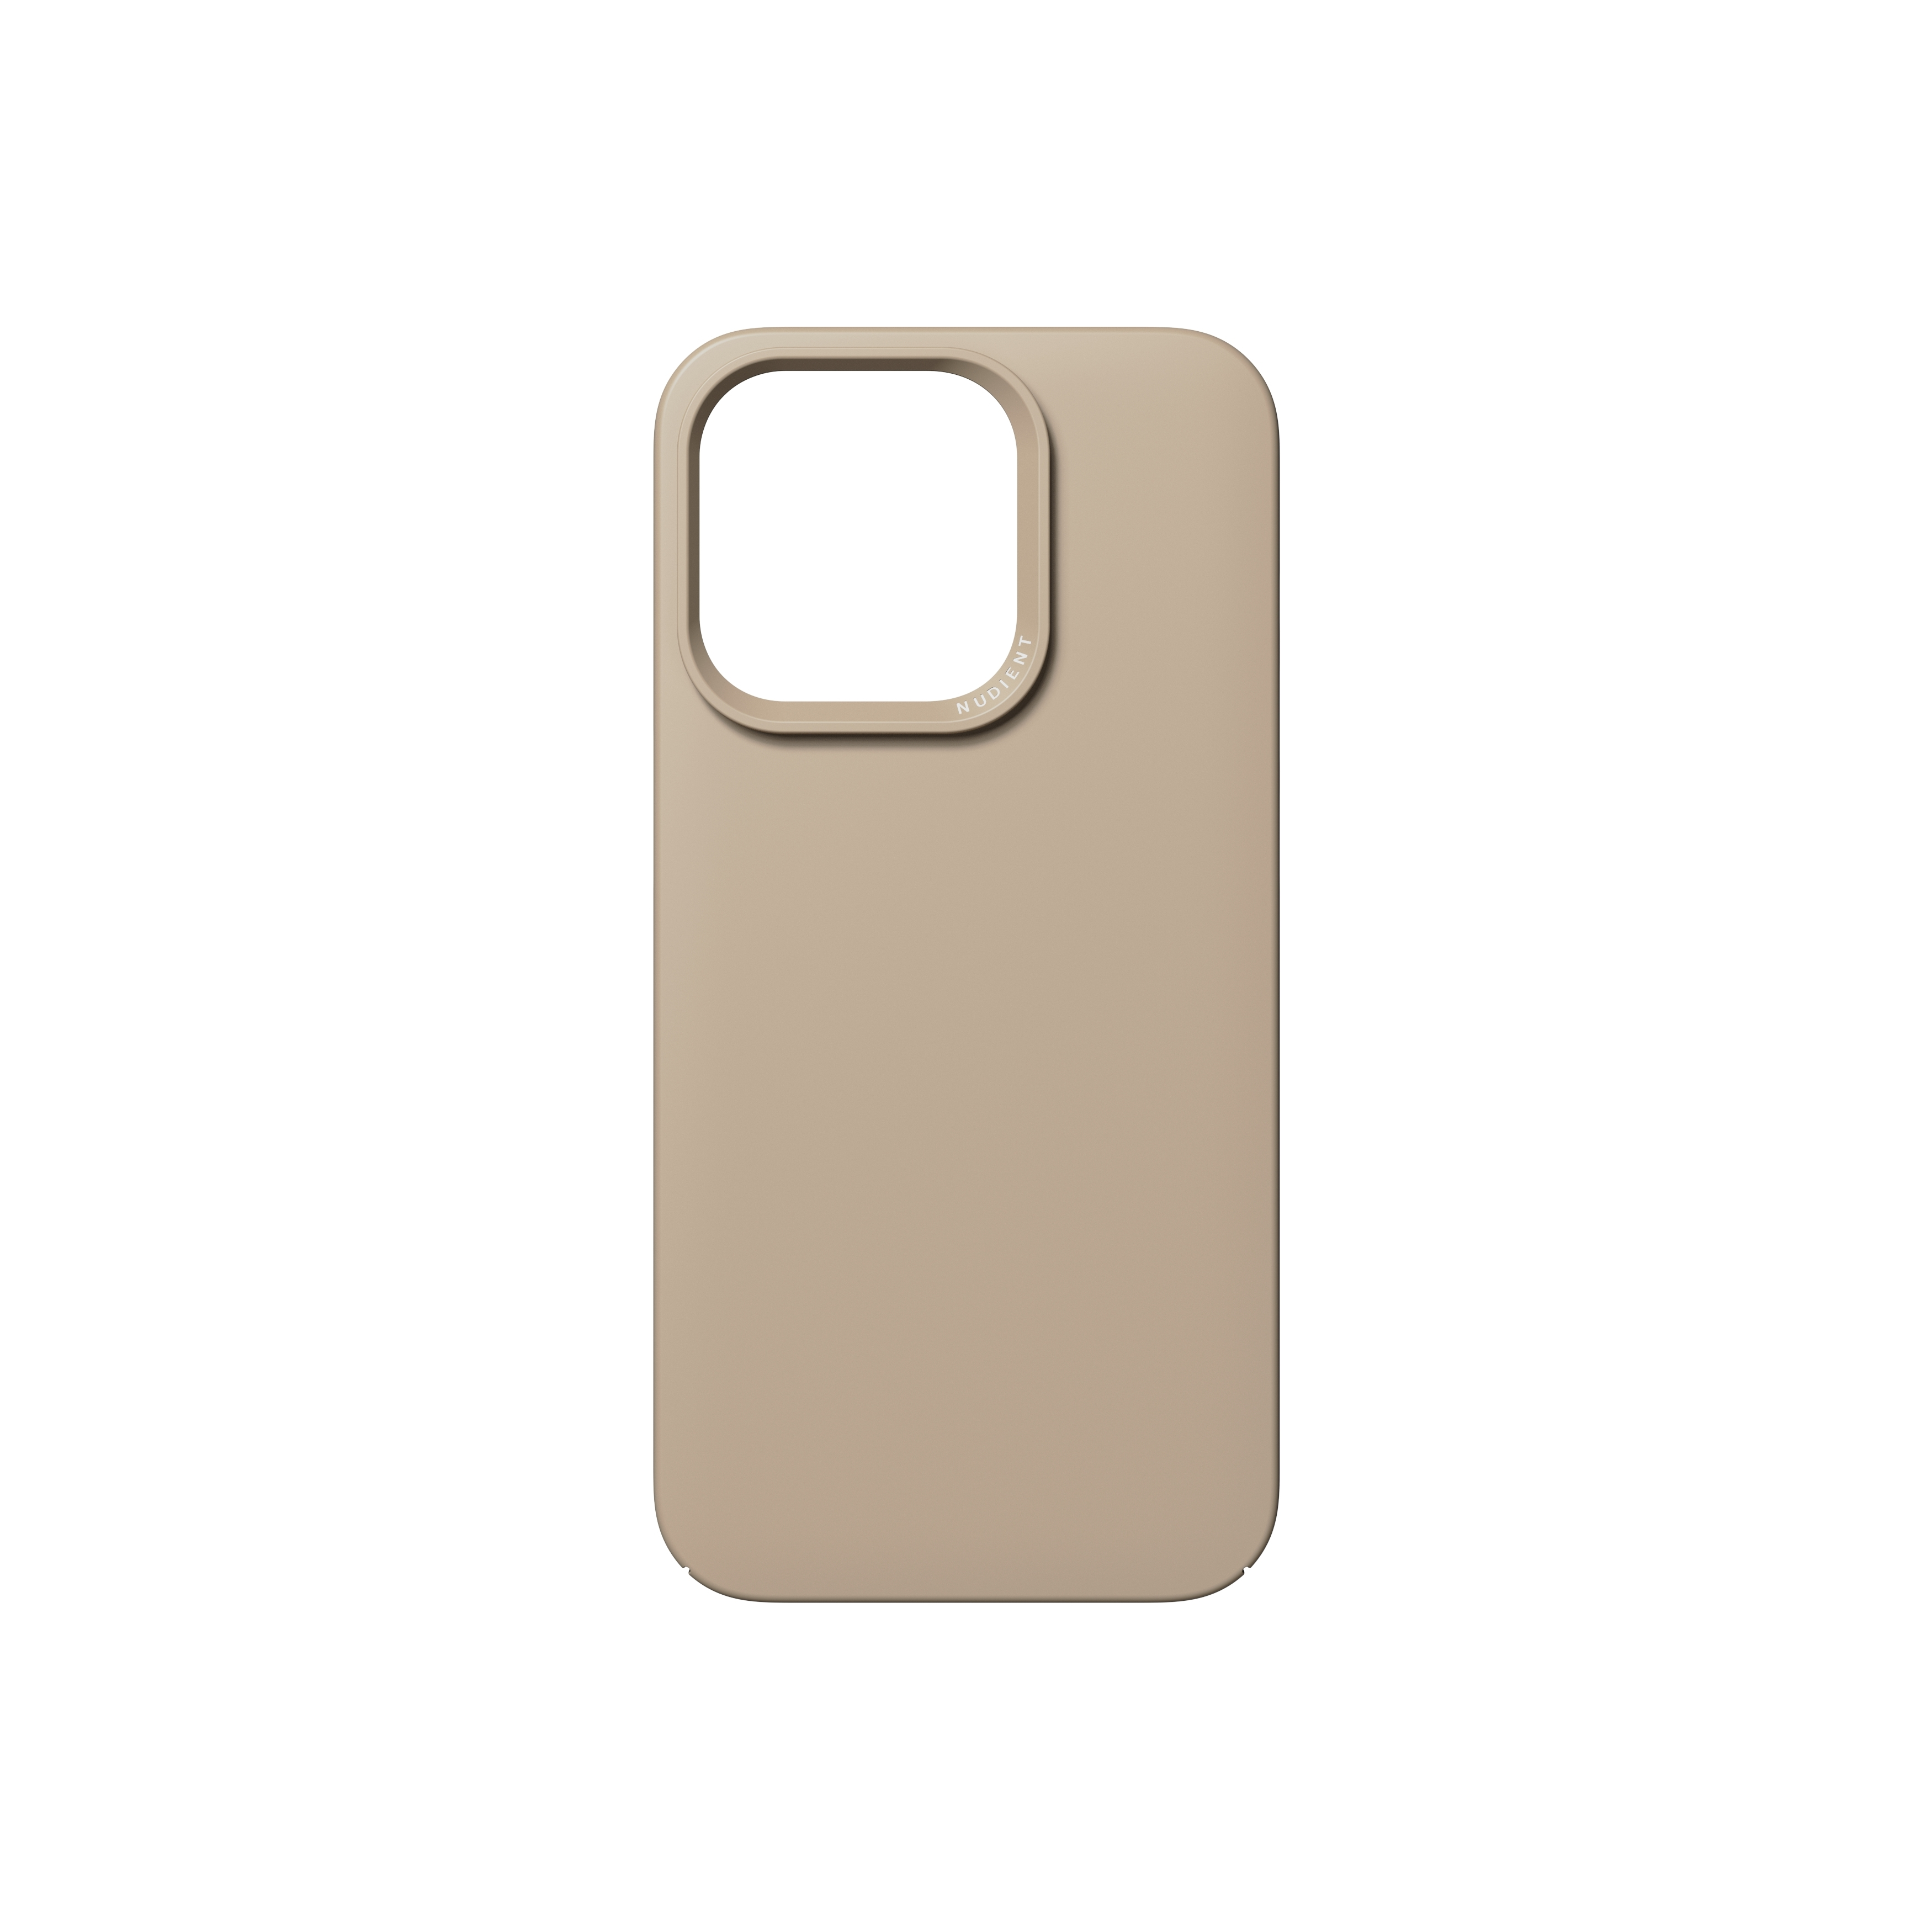 PRO, Backcover, Thin, NUDIENT SAND 14 IPHONE APPLE,